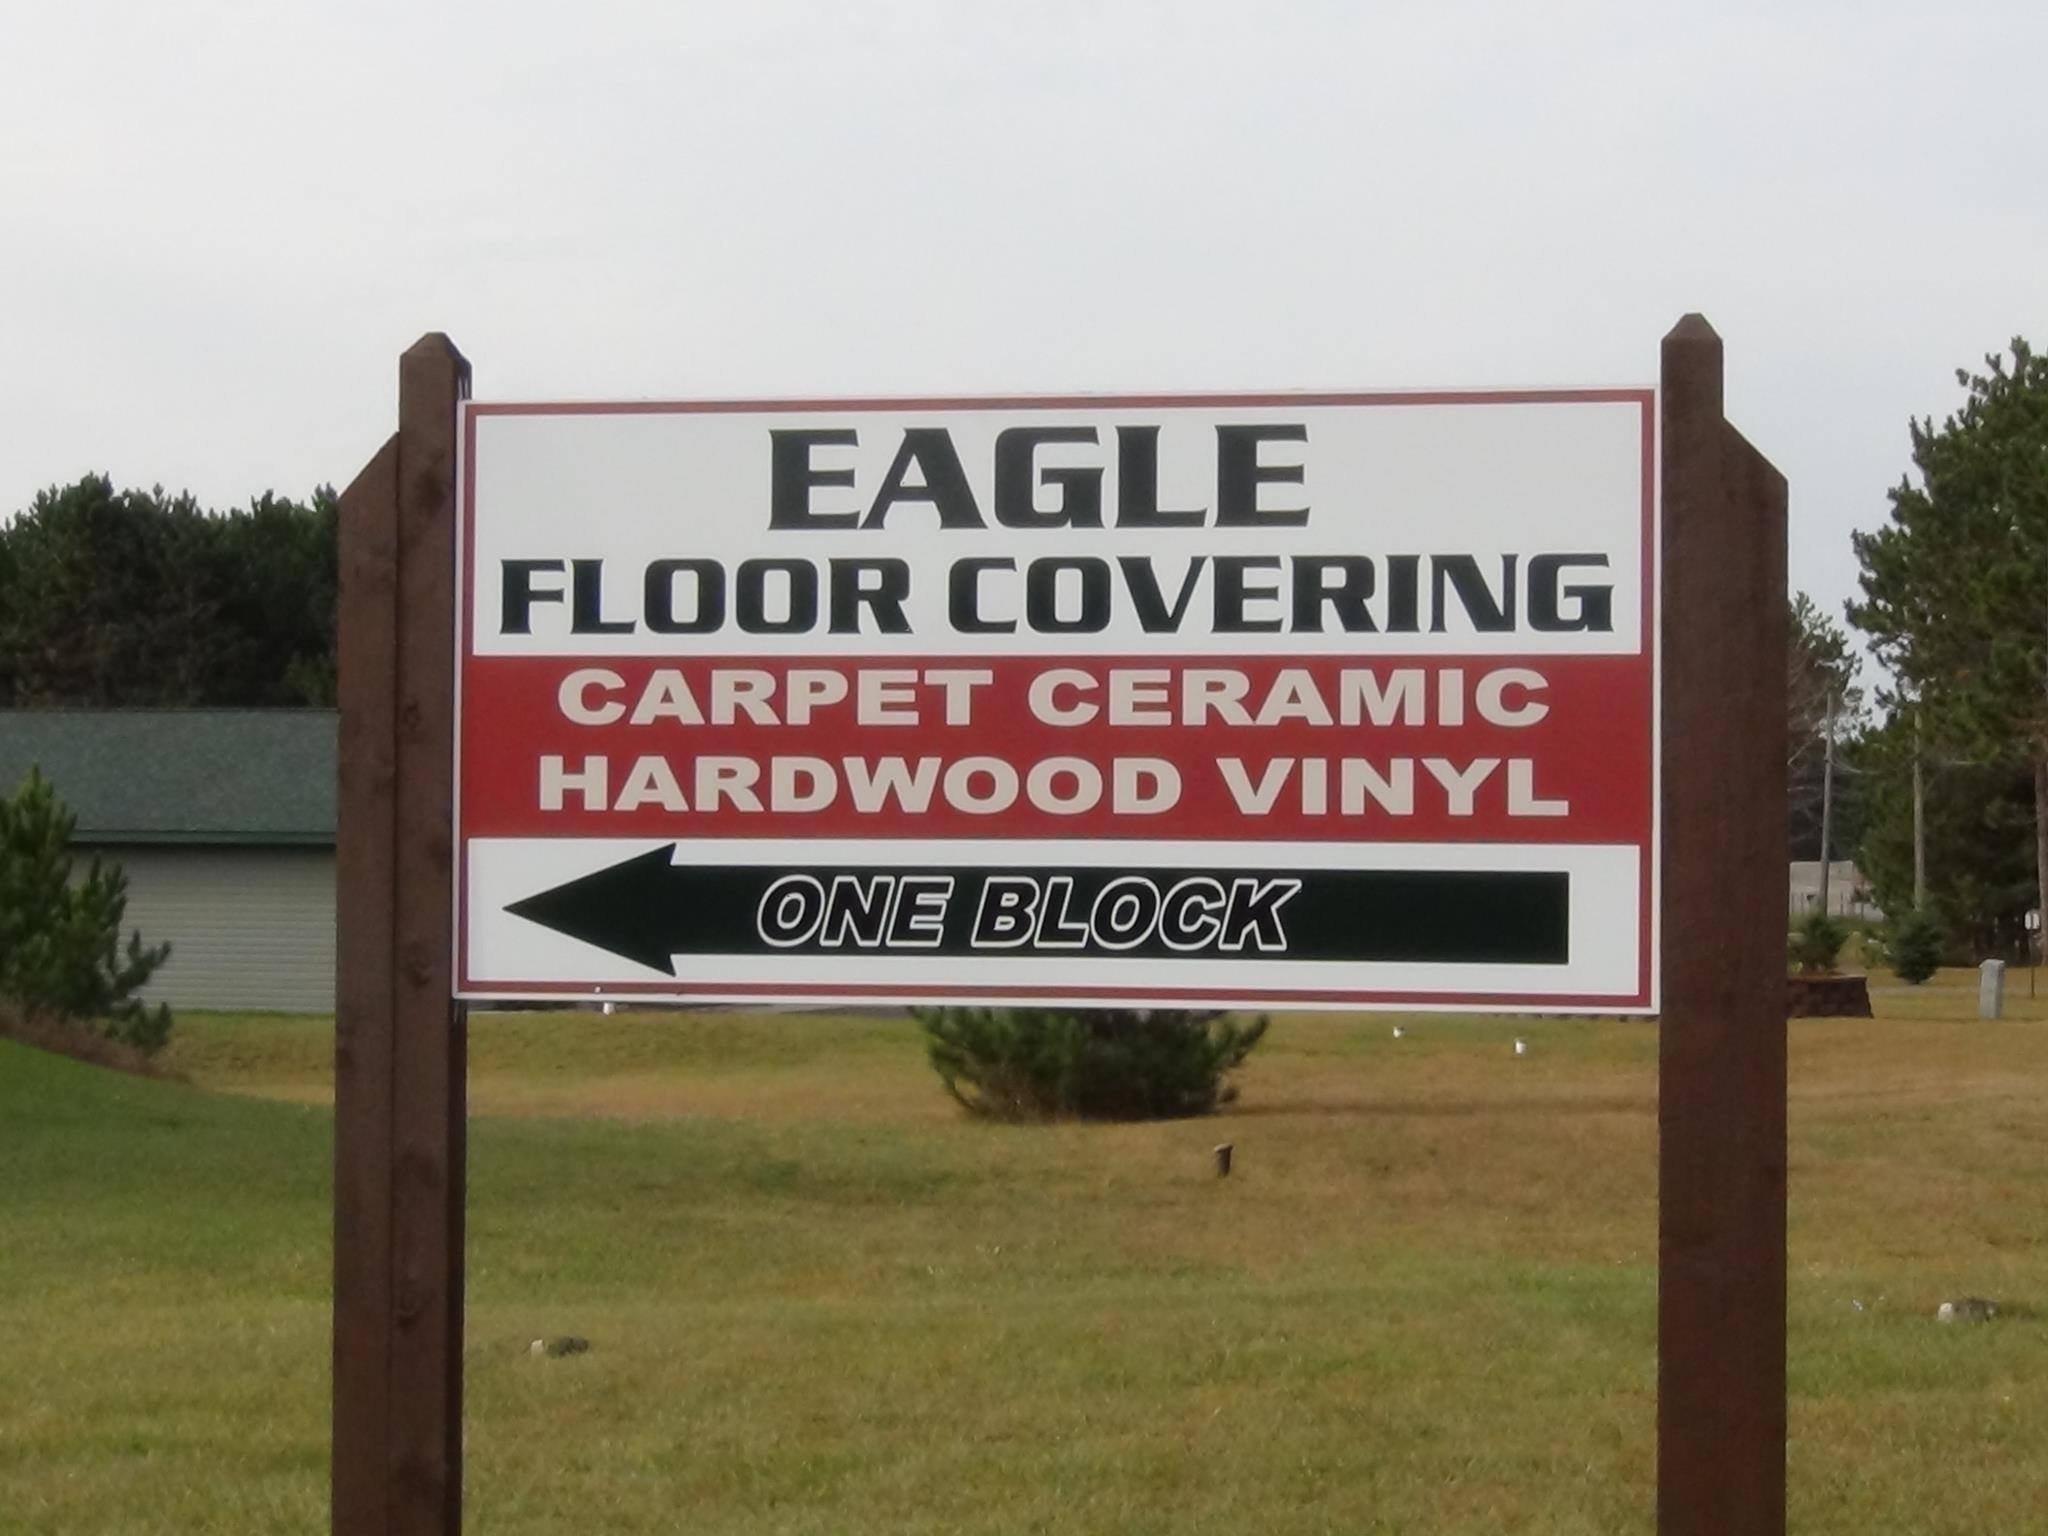 About Eagle Floor Covering Center in Eagle River